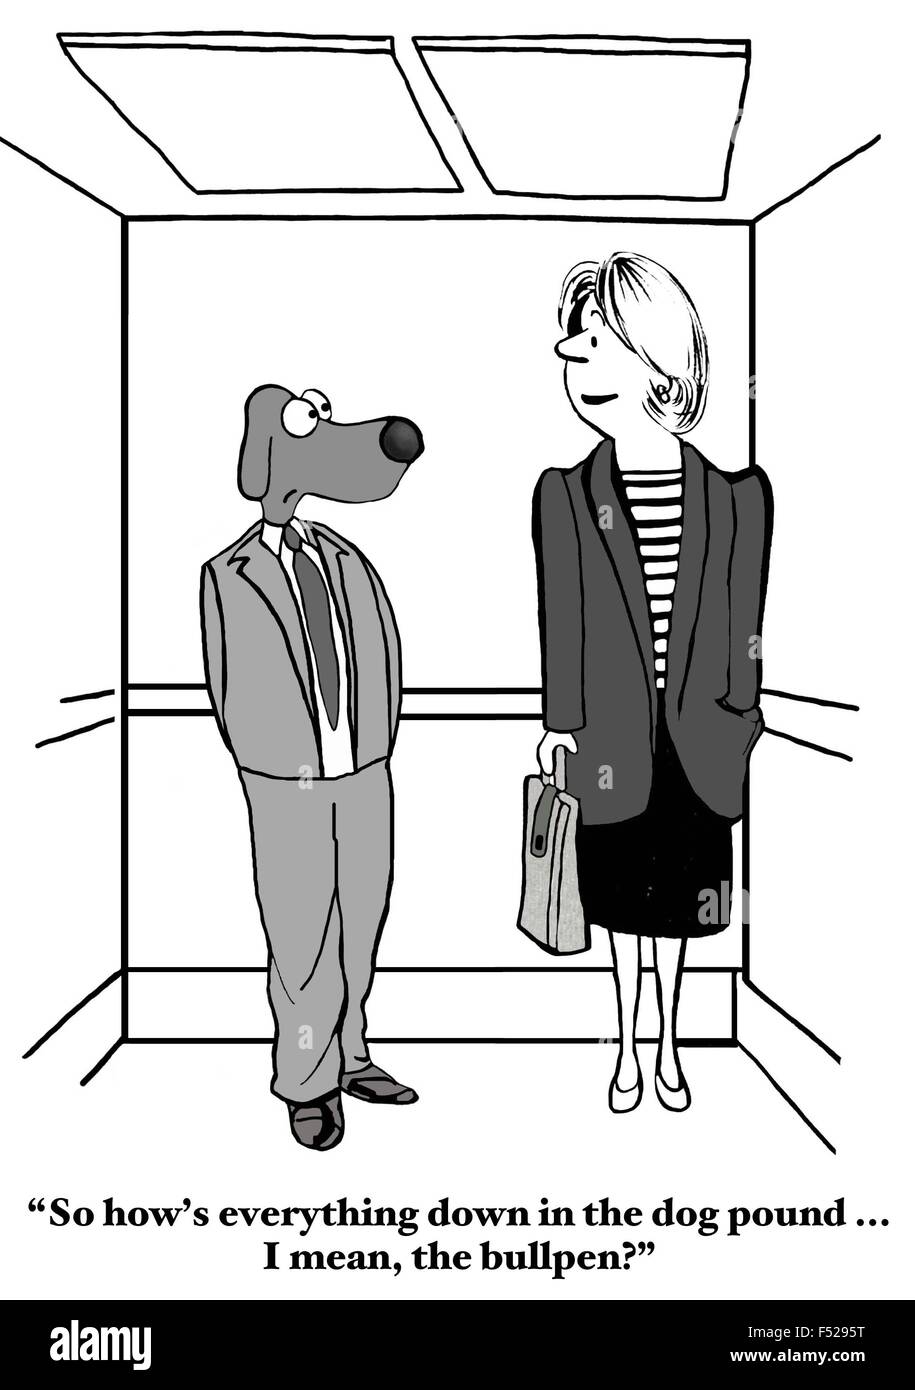 Business cartoon of businesswoman asking dog, 'So how's everything down an the dog pound... I mean, the bullpen?'. Stock Photo